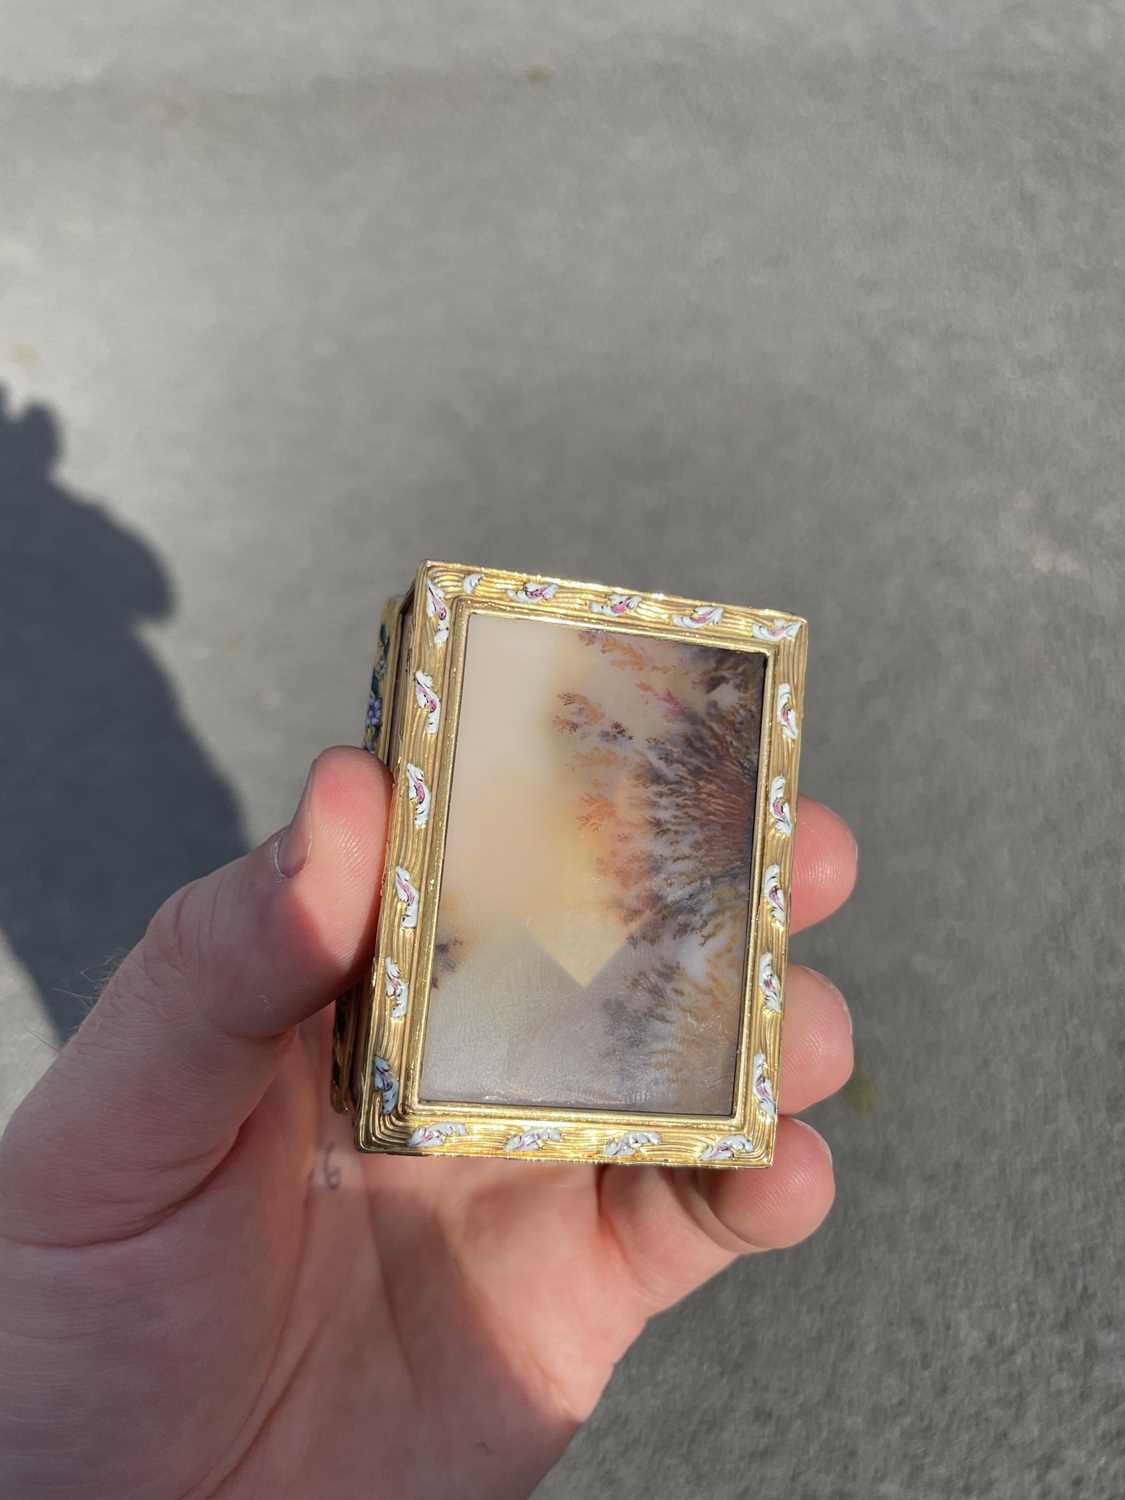 A RARE LOUIS XV PICTURE AGATE, GOLD AND ENAMEL SNUFF BOX, BY NÖEL HARDIVILLERS - Image 8 of 13